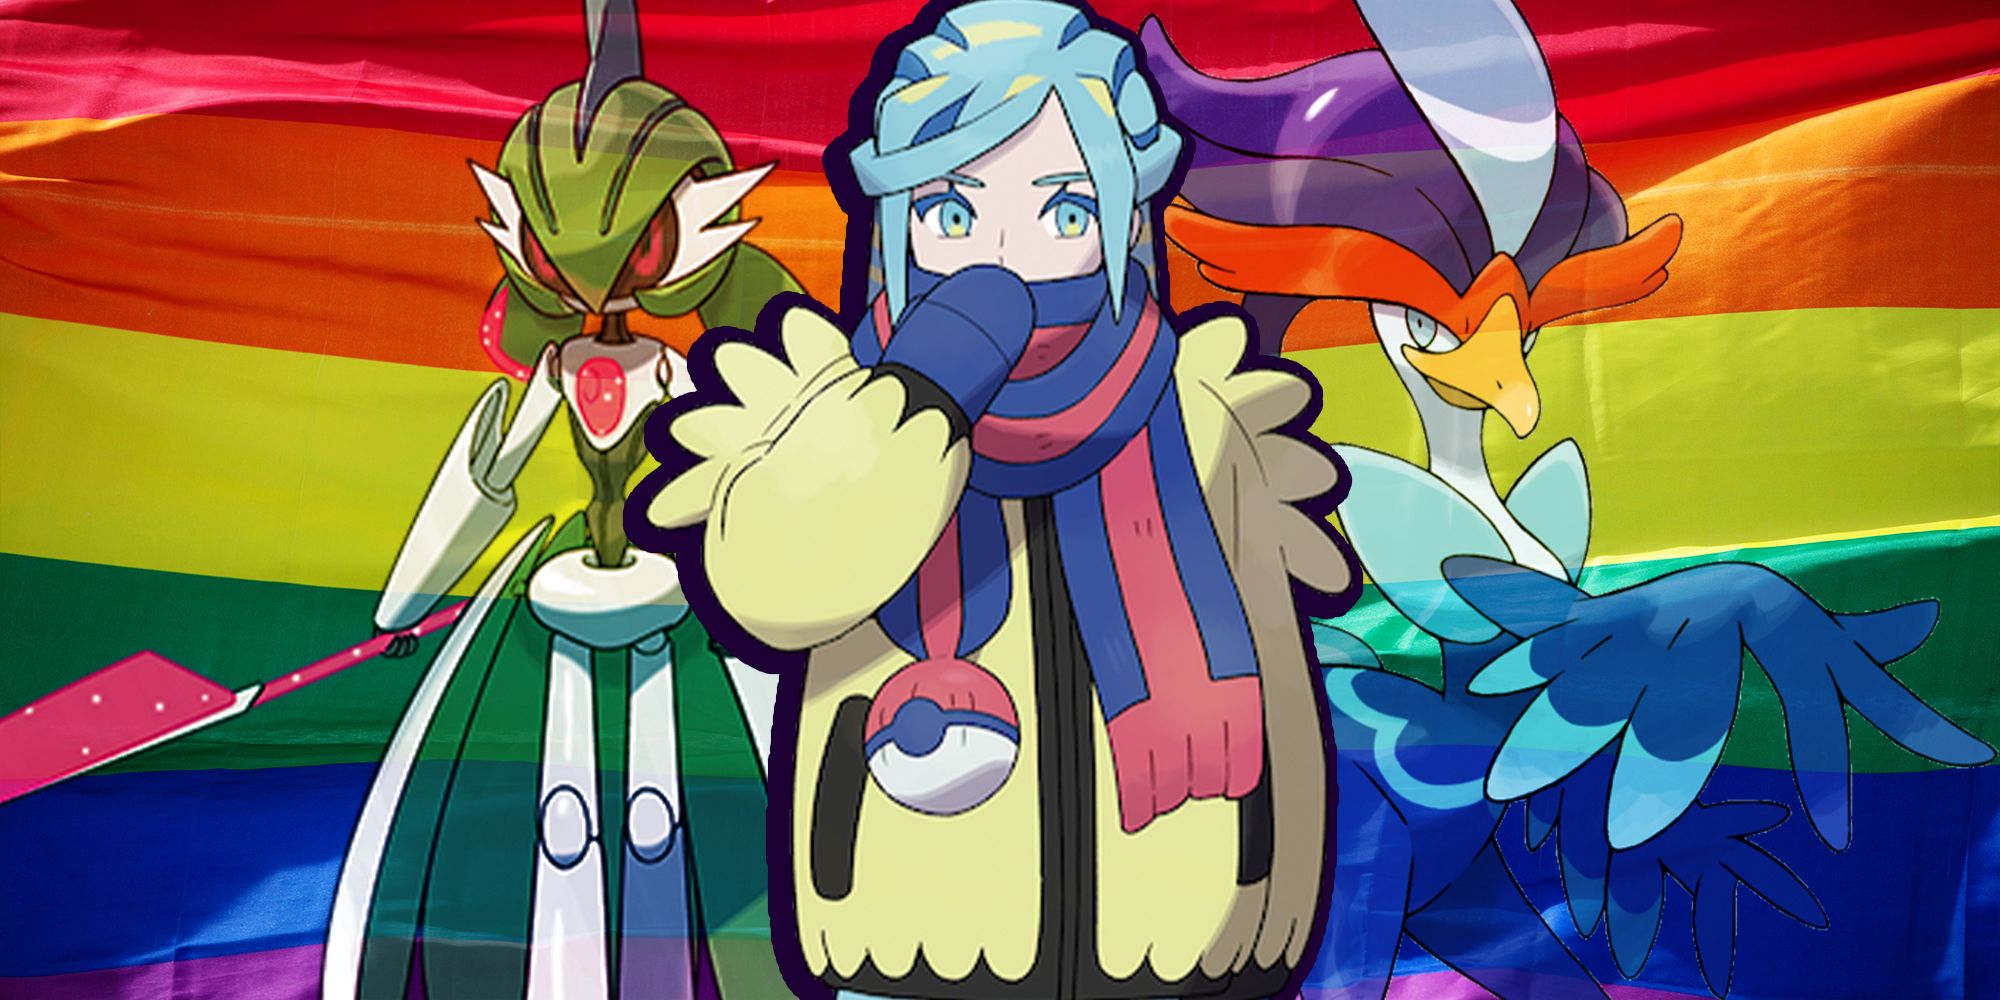 POkemon Grusha, Iron Valiant, and Quaquaval in front of a pride flag